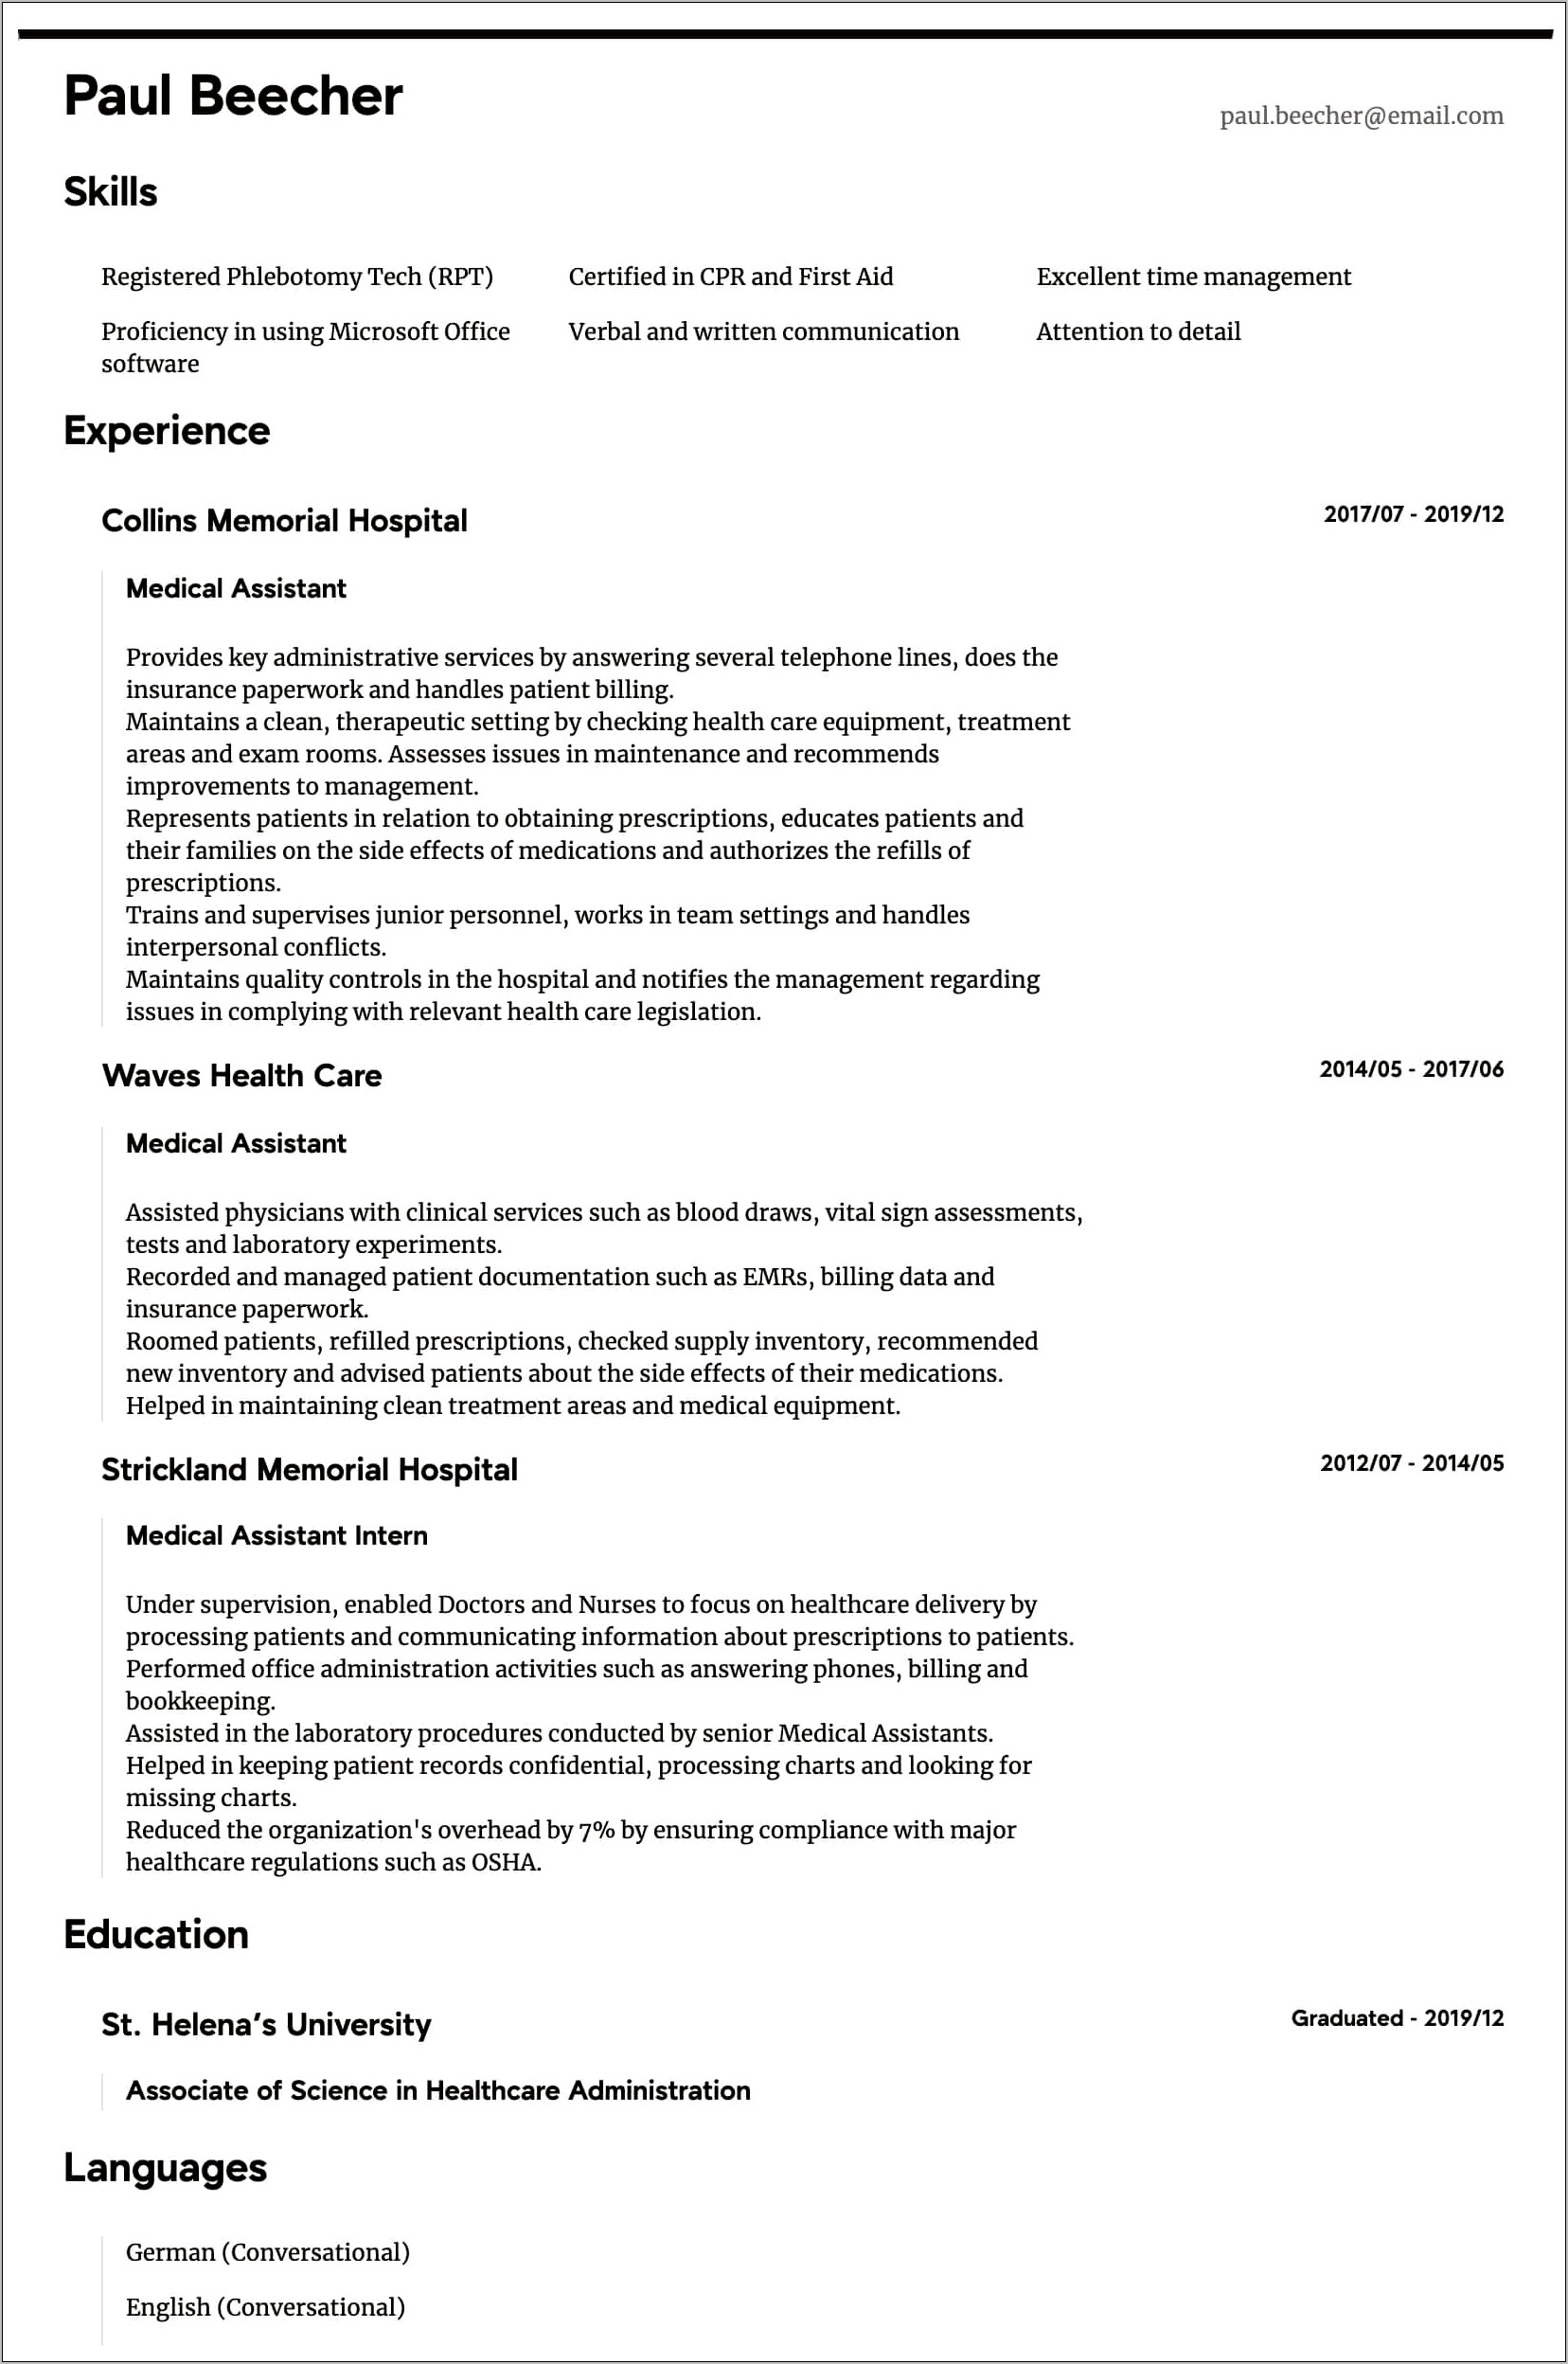 resume objective examples medical field